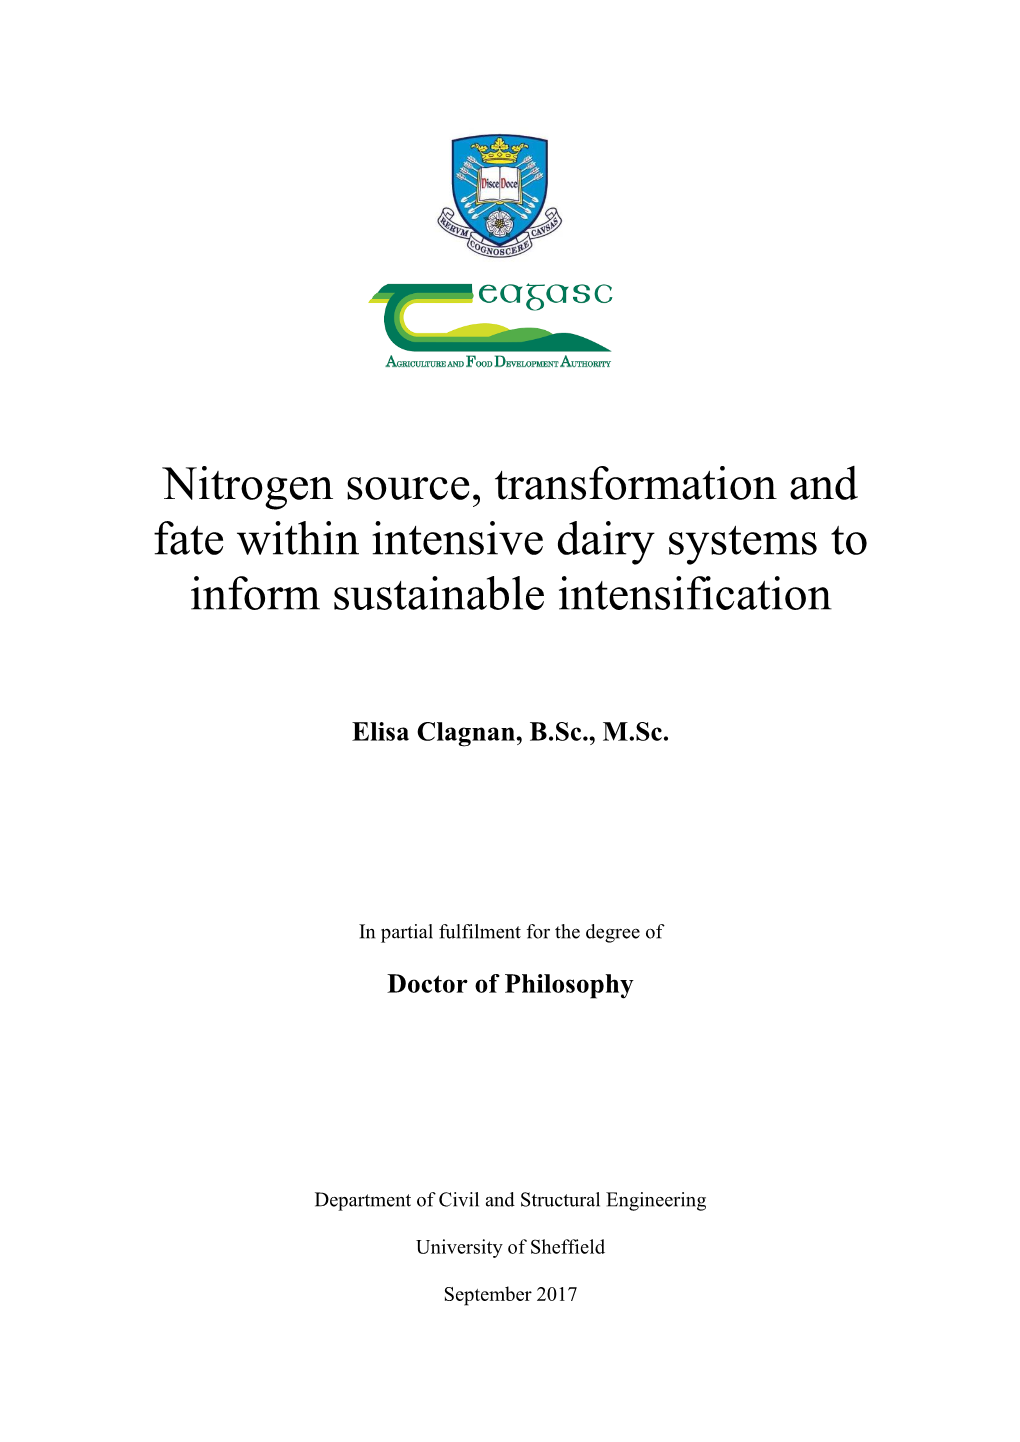 Nitrogen Source, Transformation and Fate Within Intensive Dairy Systems to Inform Sustainable Intensification